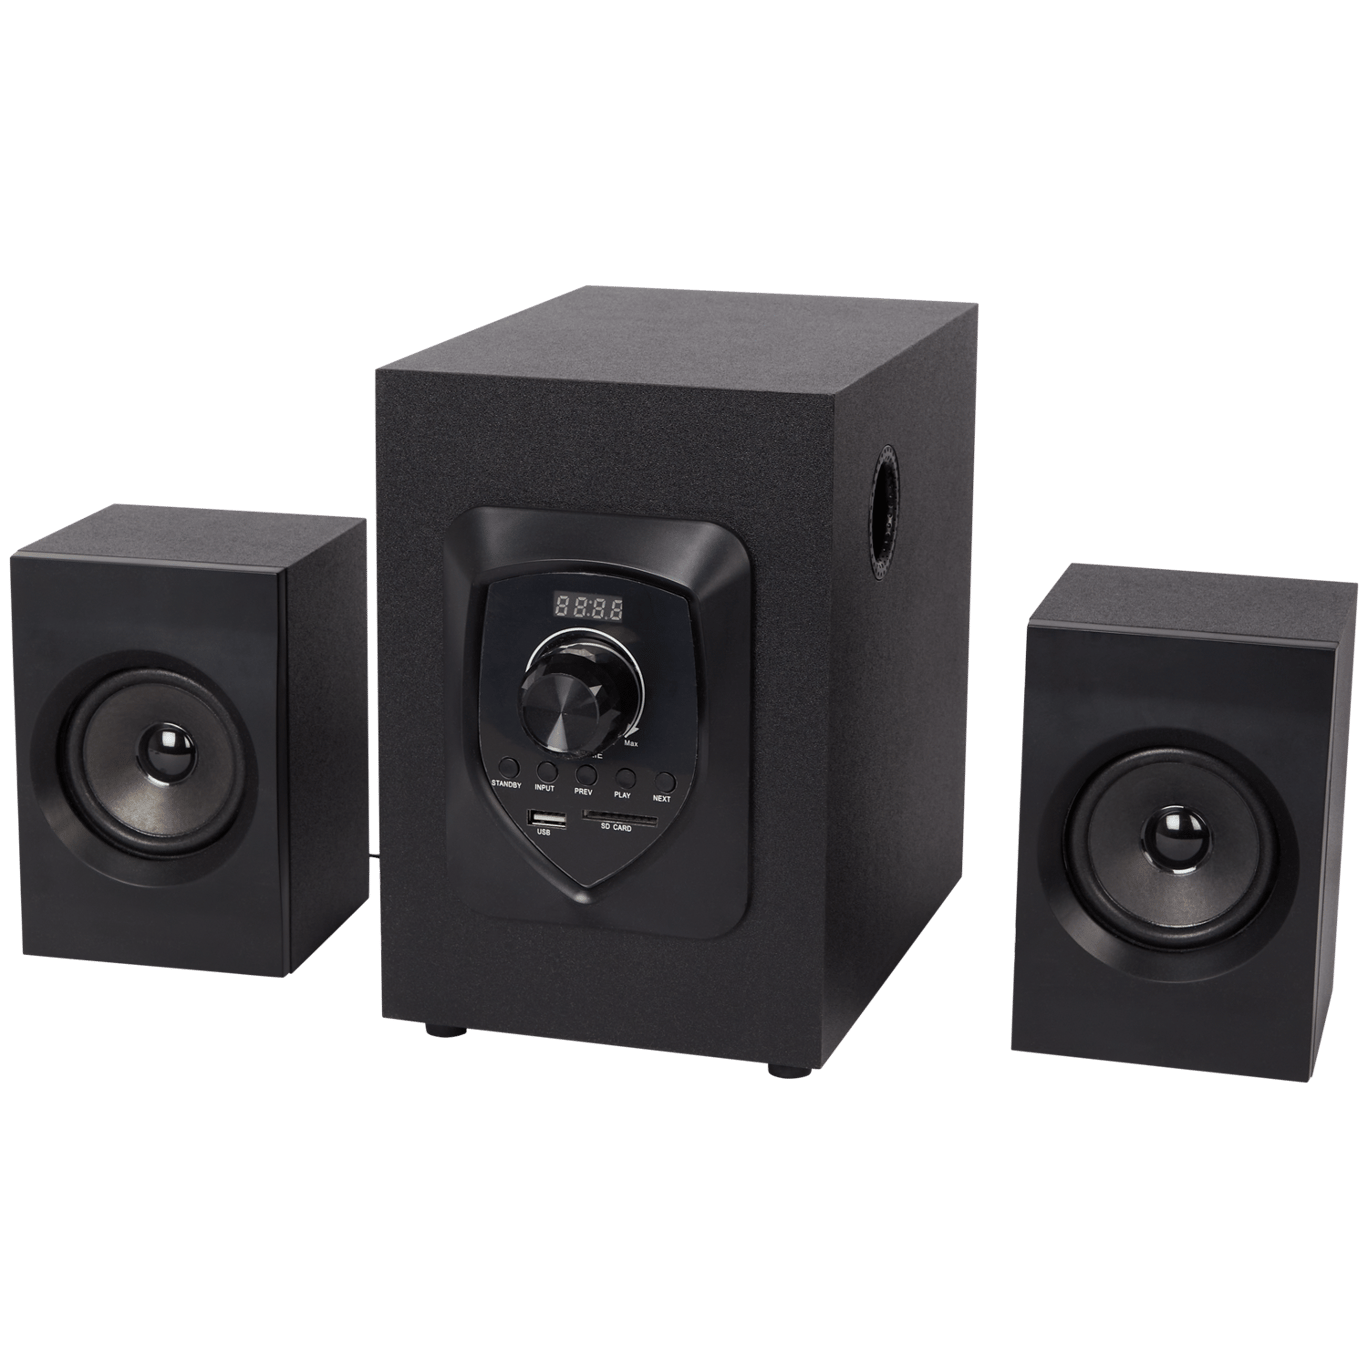 droogte tempo Op maat Roseland stereo speaker | Action.com